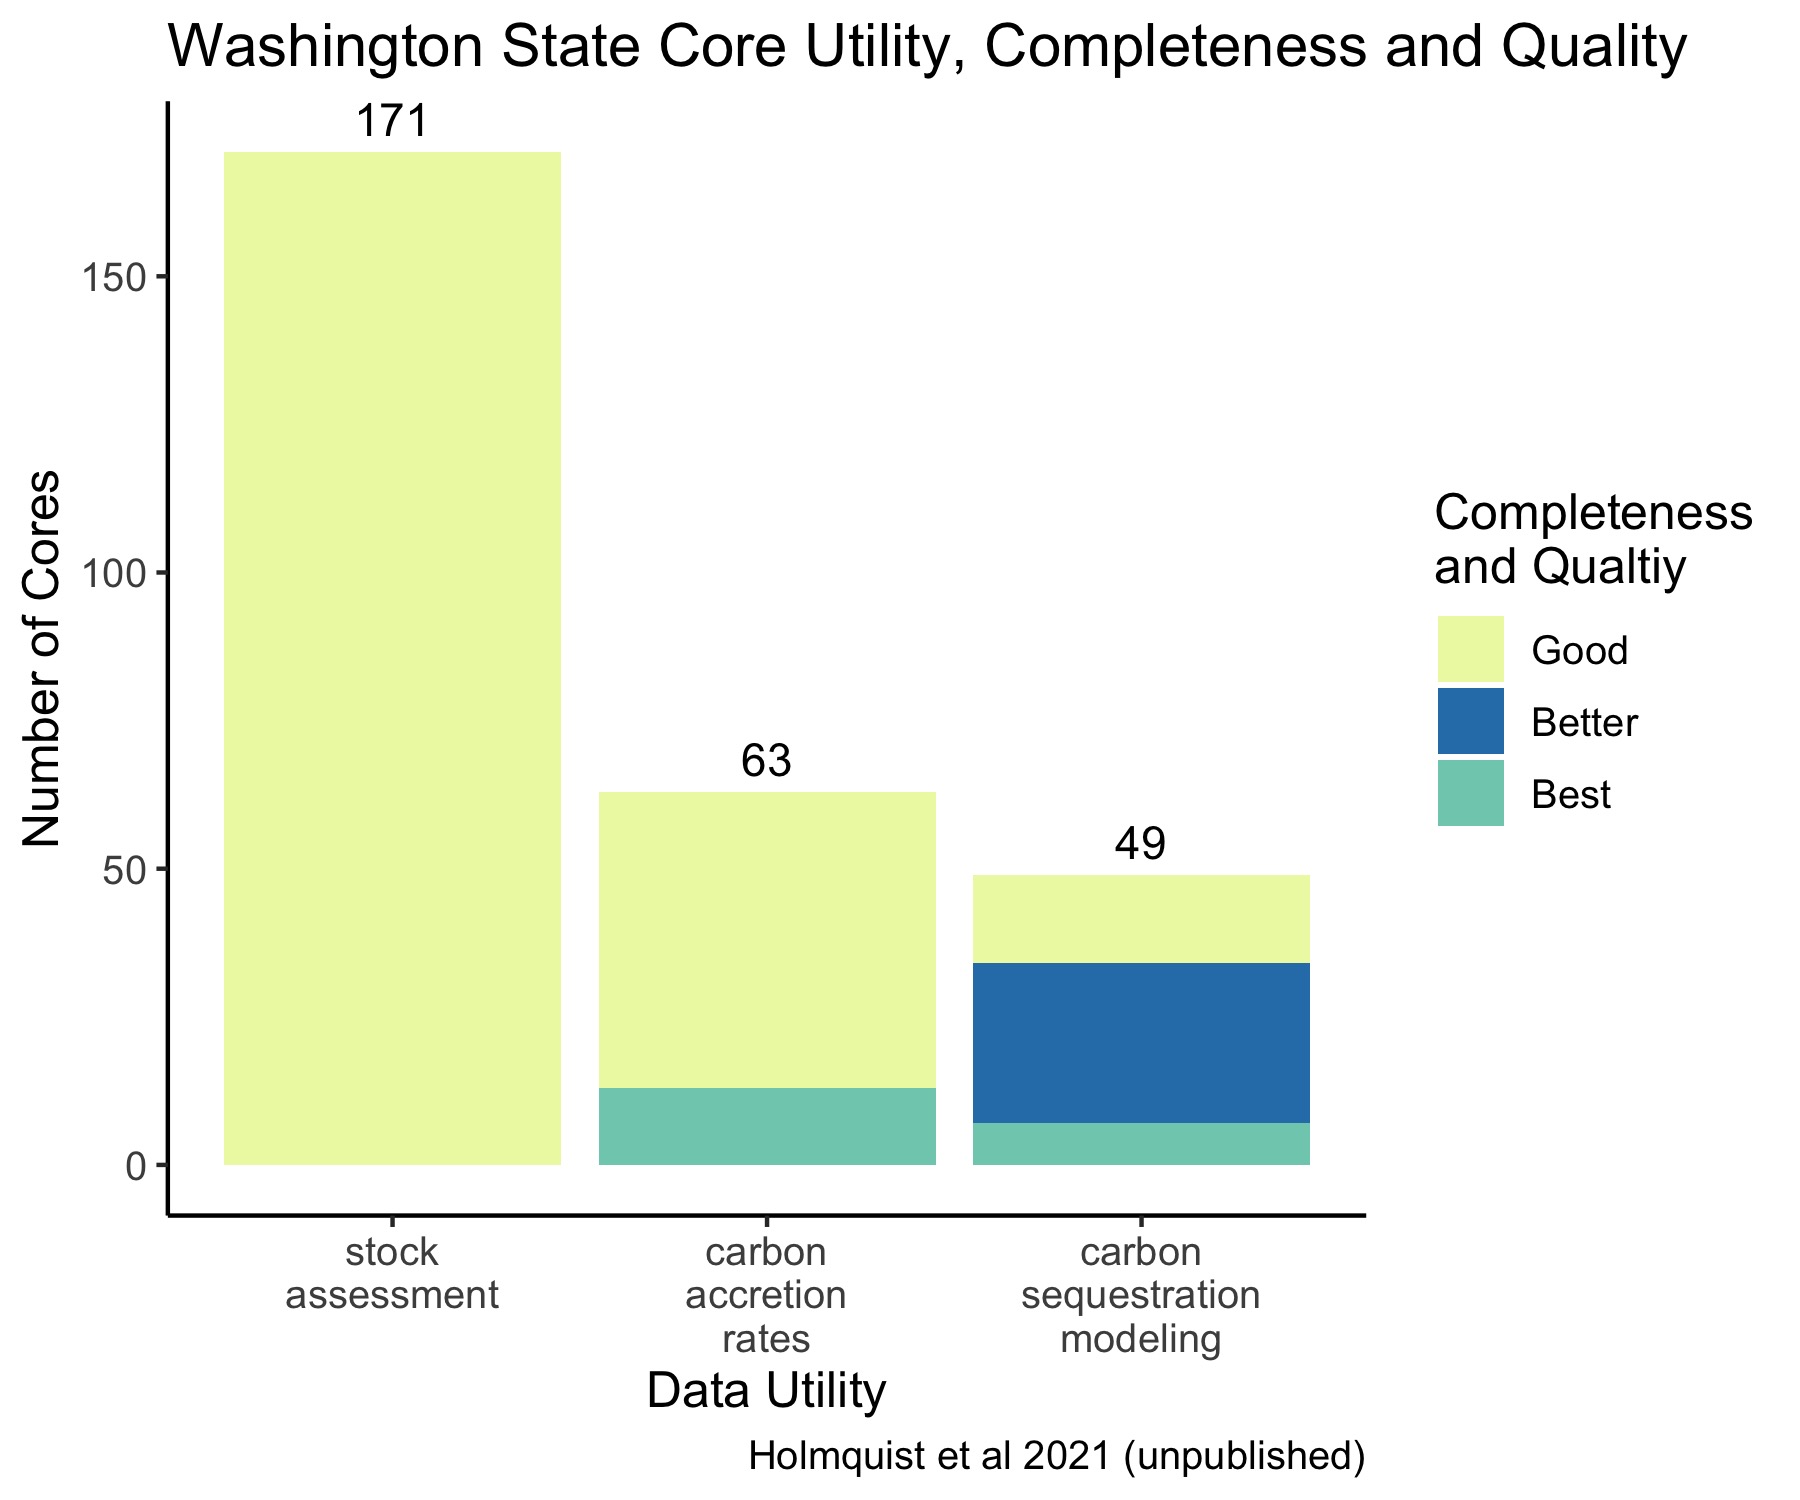 Washington State Core Data Utility, Completeness, and Quality.